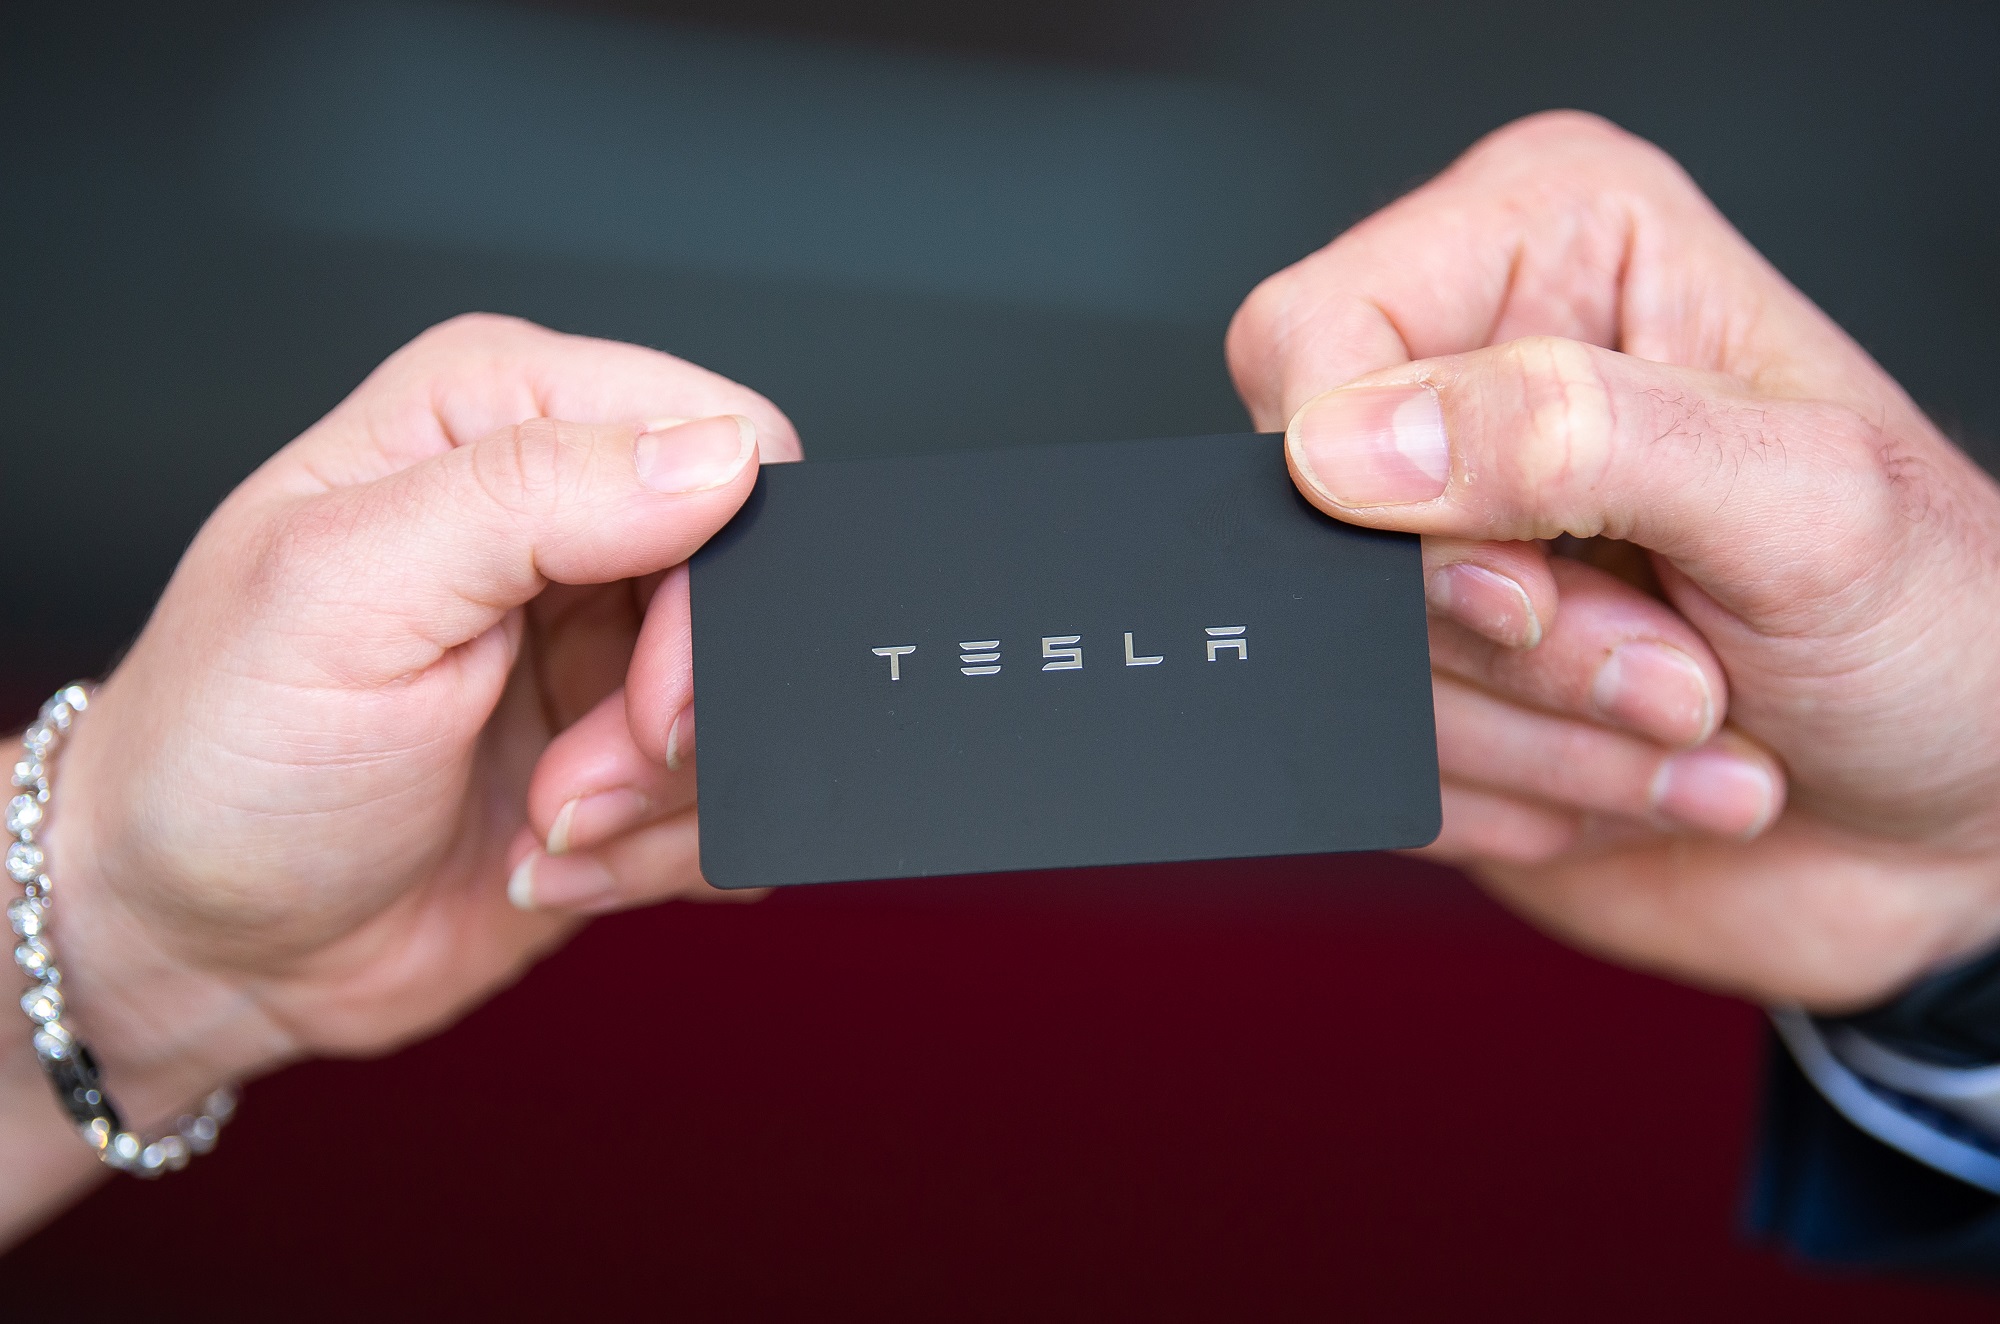 Tesla hackers might be able to take advantage of technology like the NFC cards.